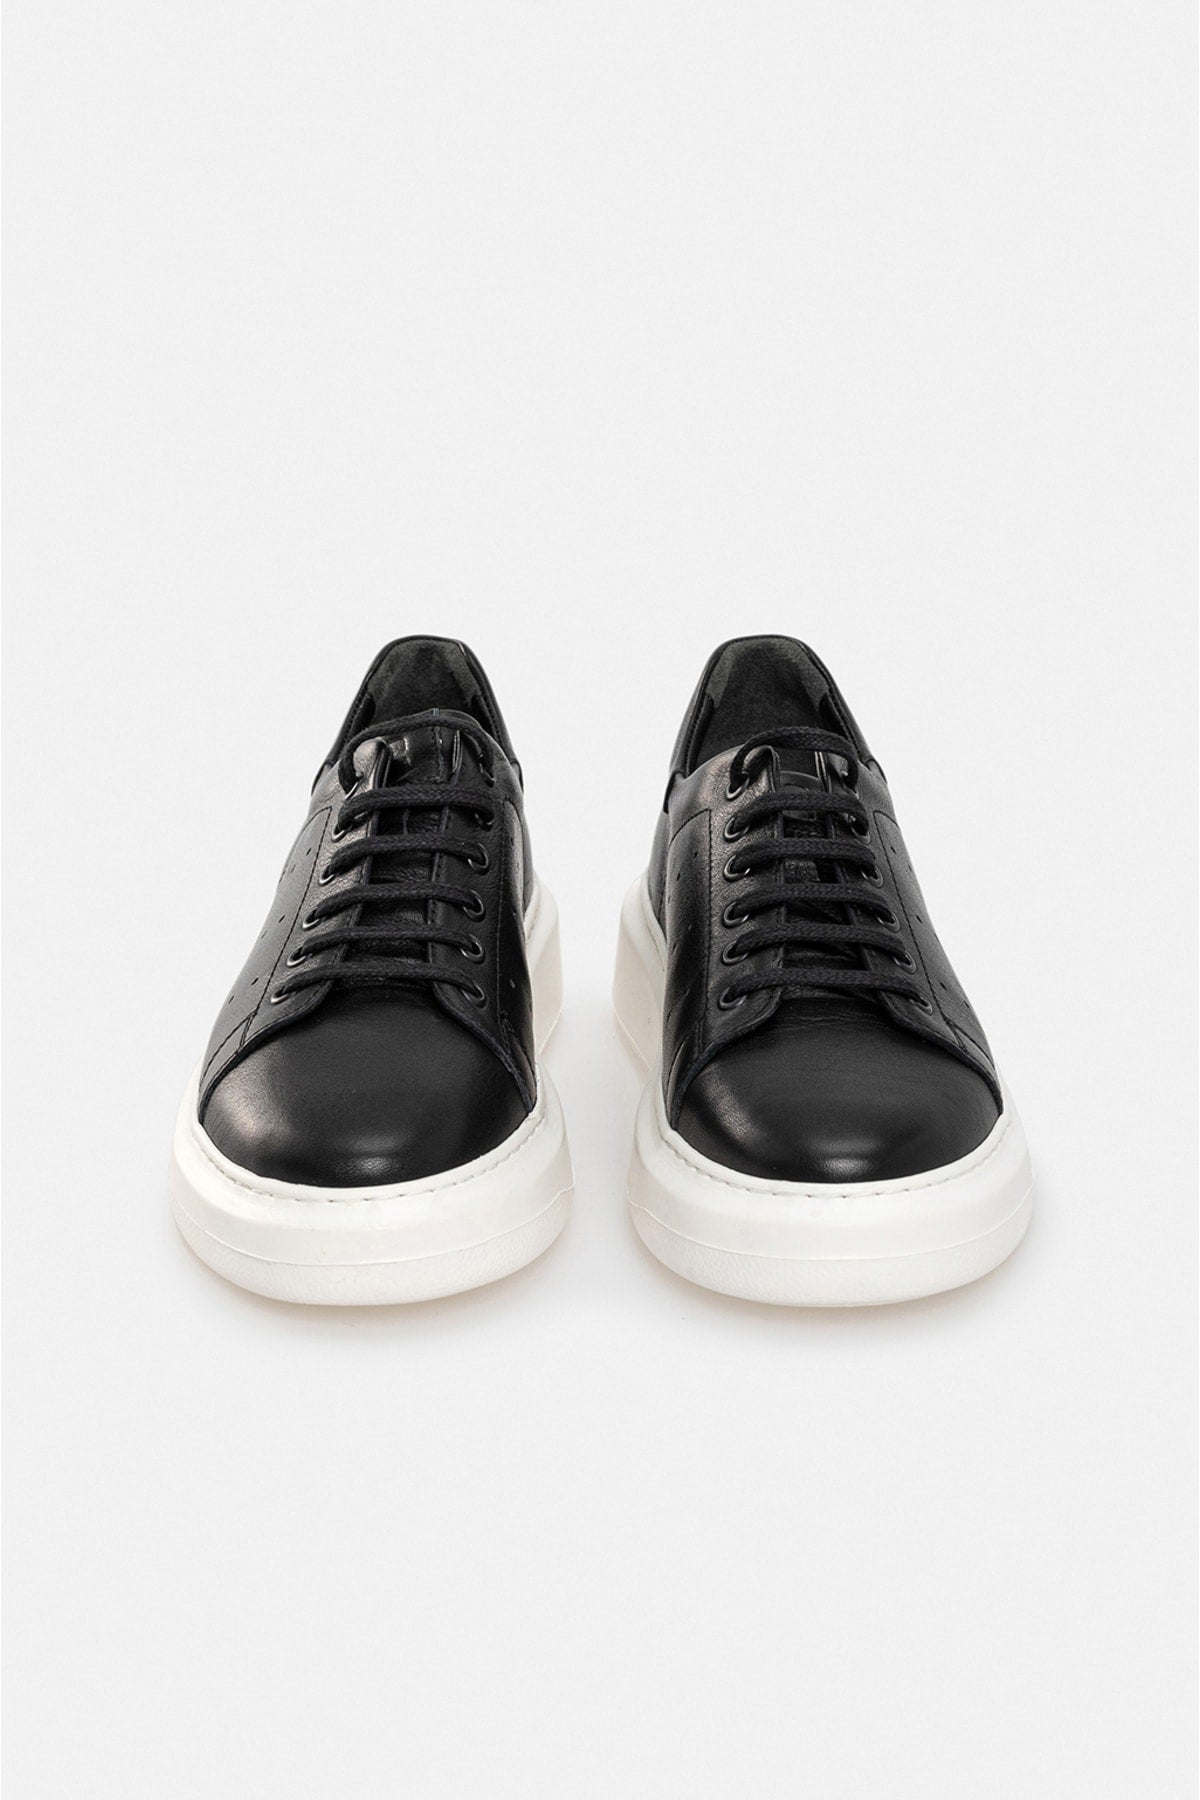 Black 100 %Leather Sneaker Shoes